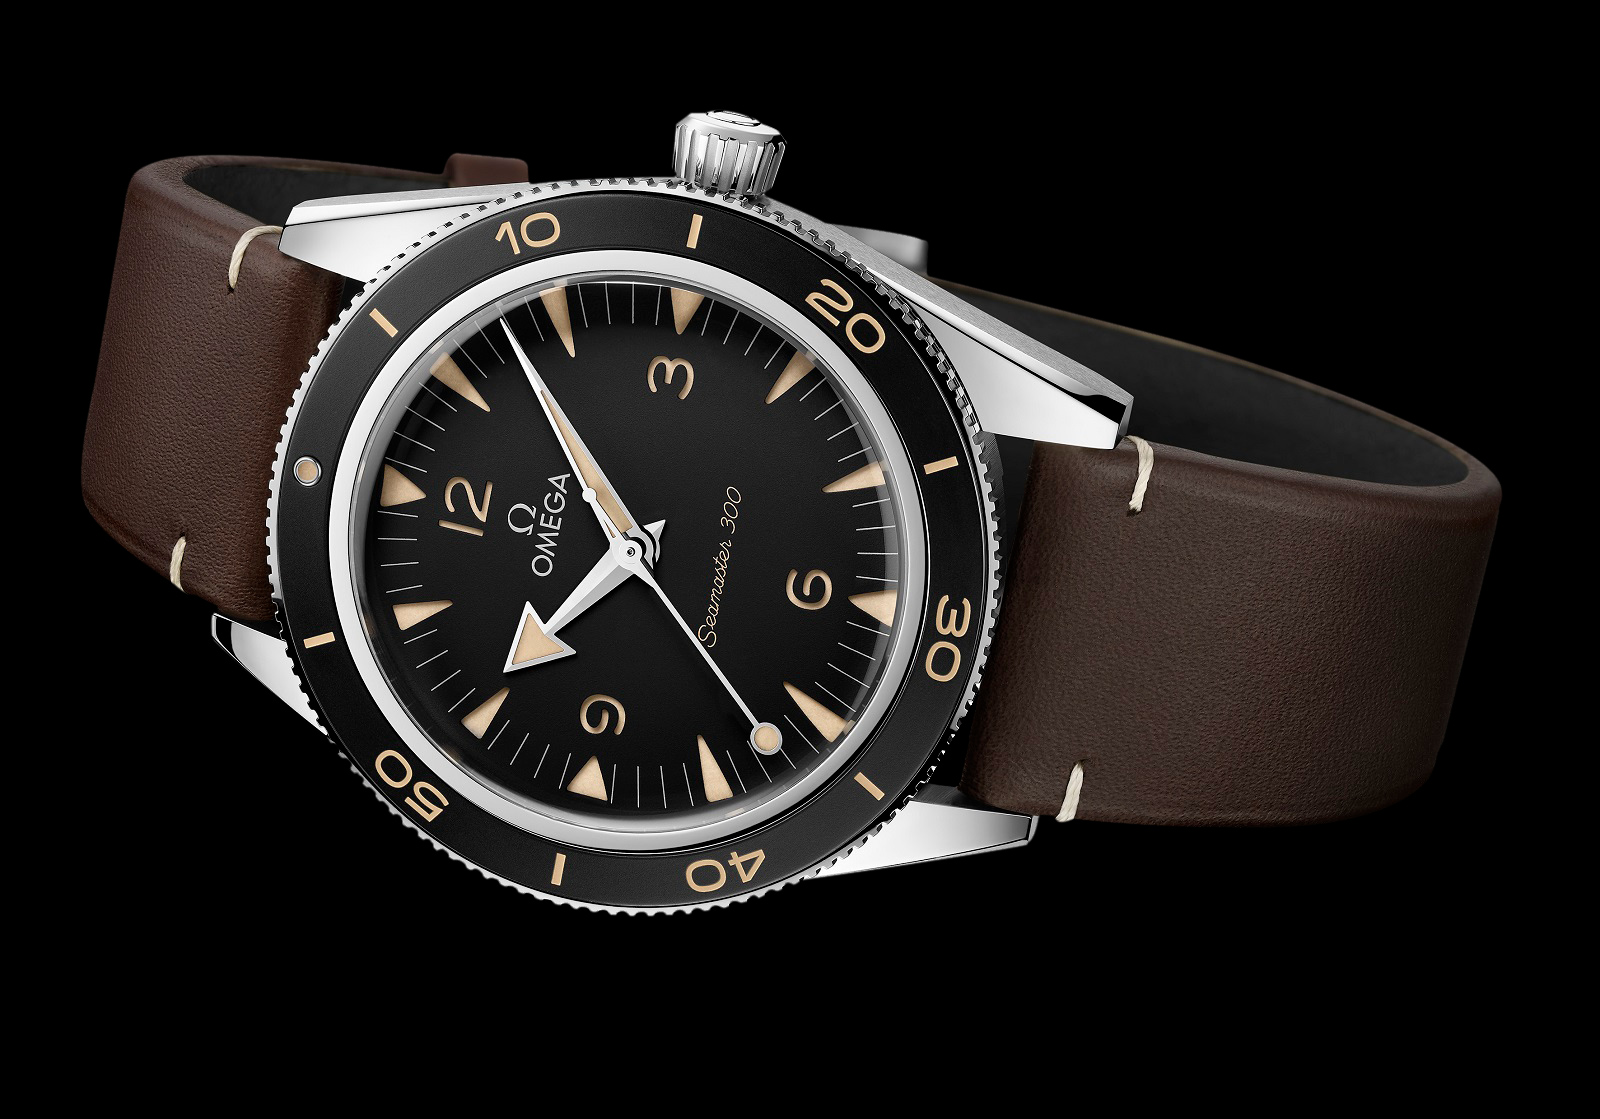 Omega Ups the Retro with the New Seamaster 300 | SJX Watches